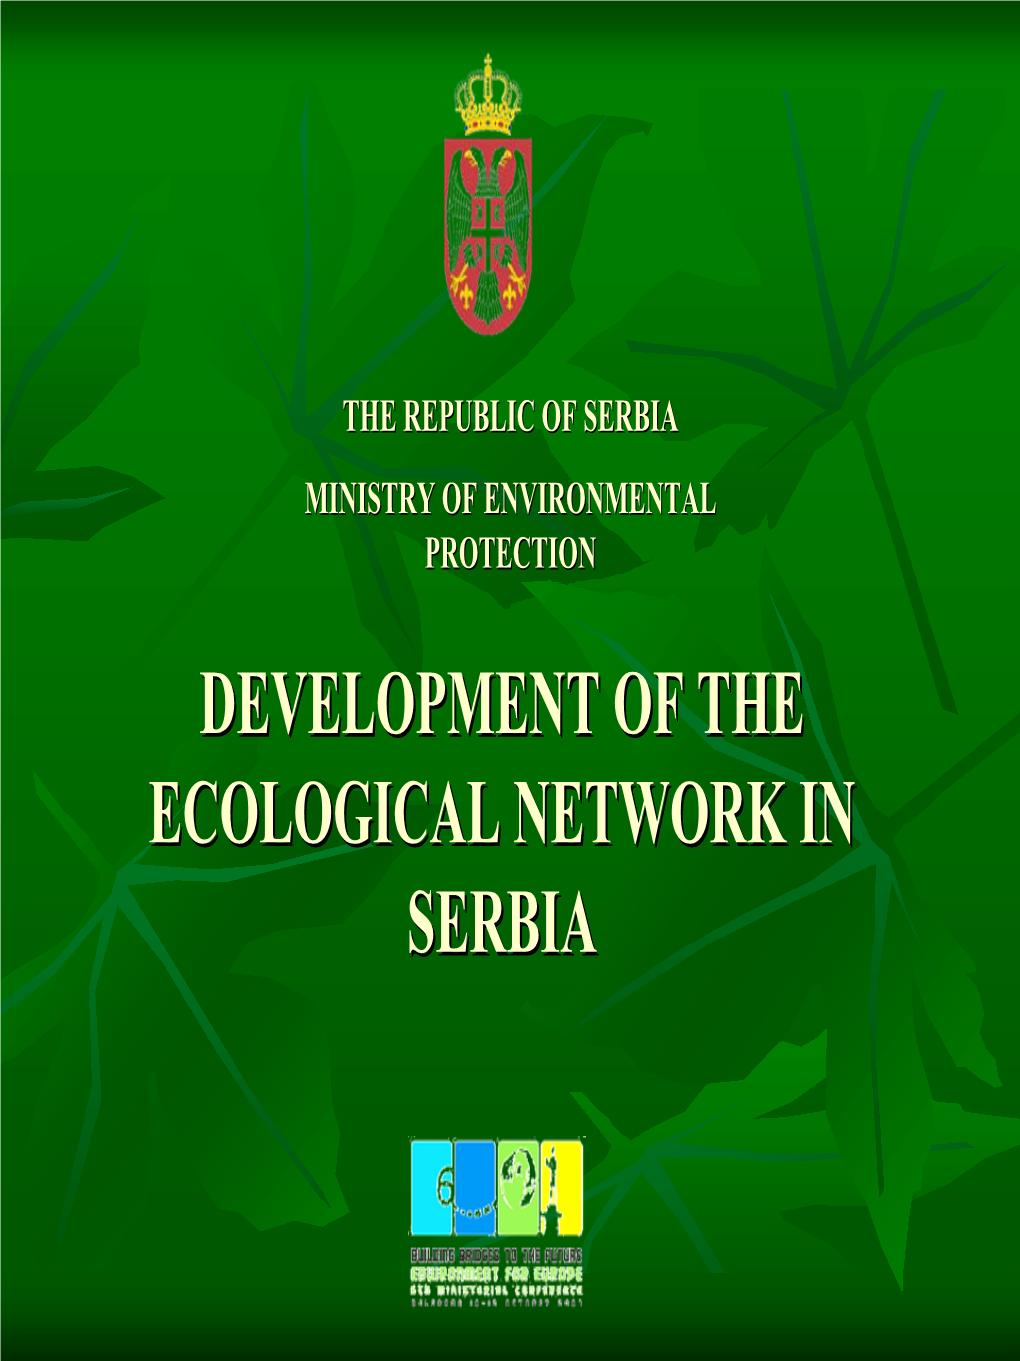 Development of the Ecological Network in Serbia